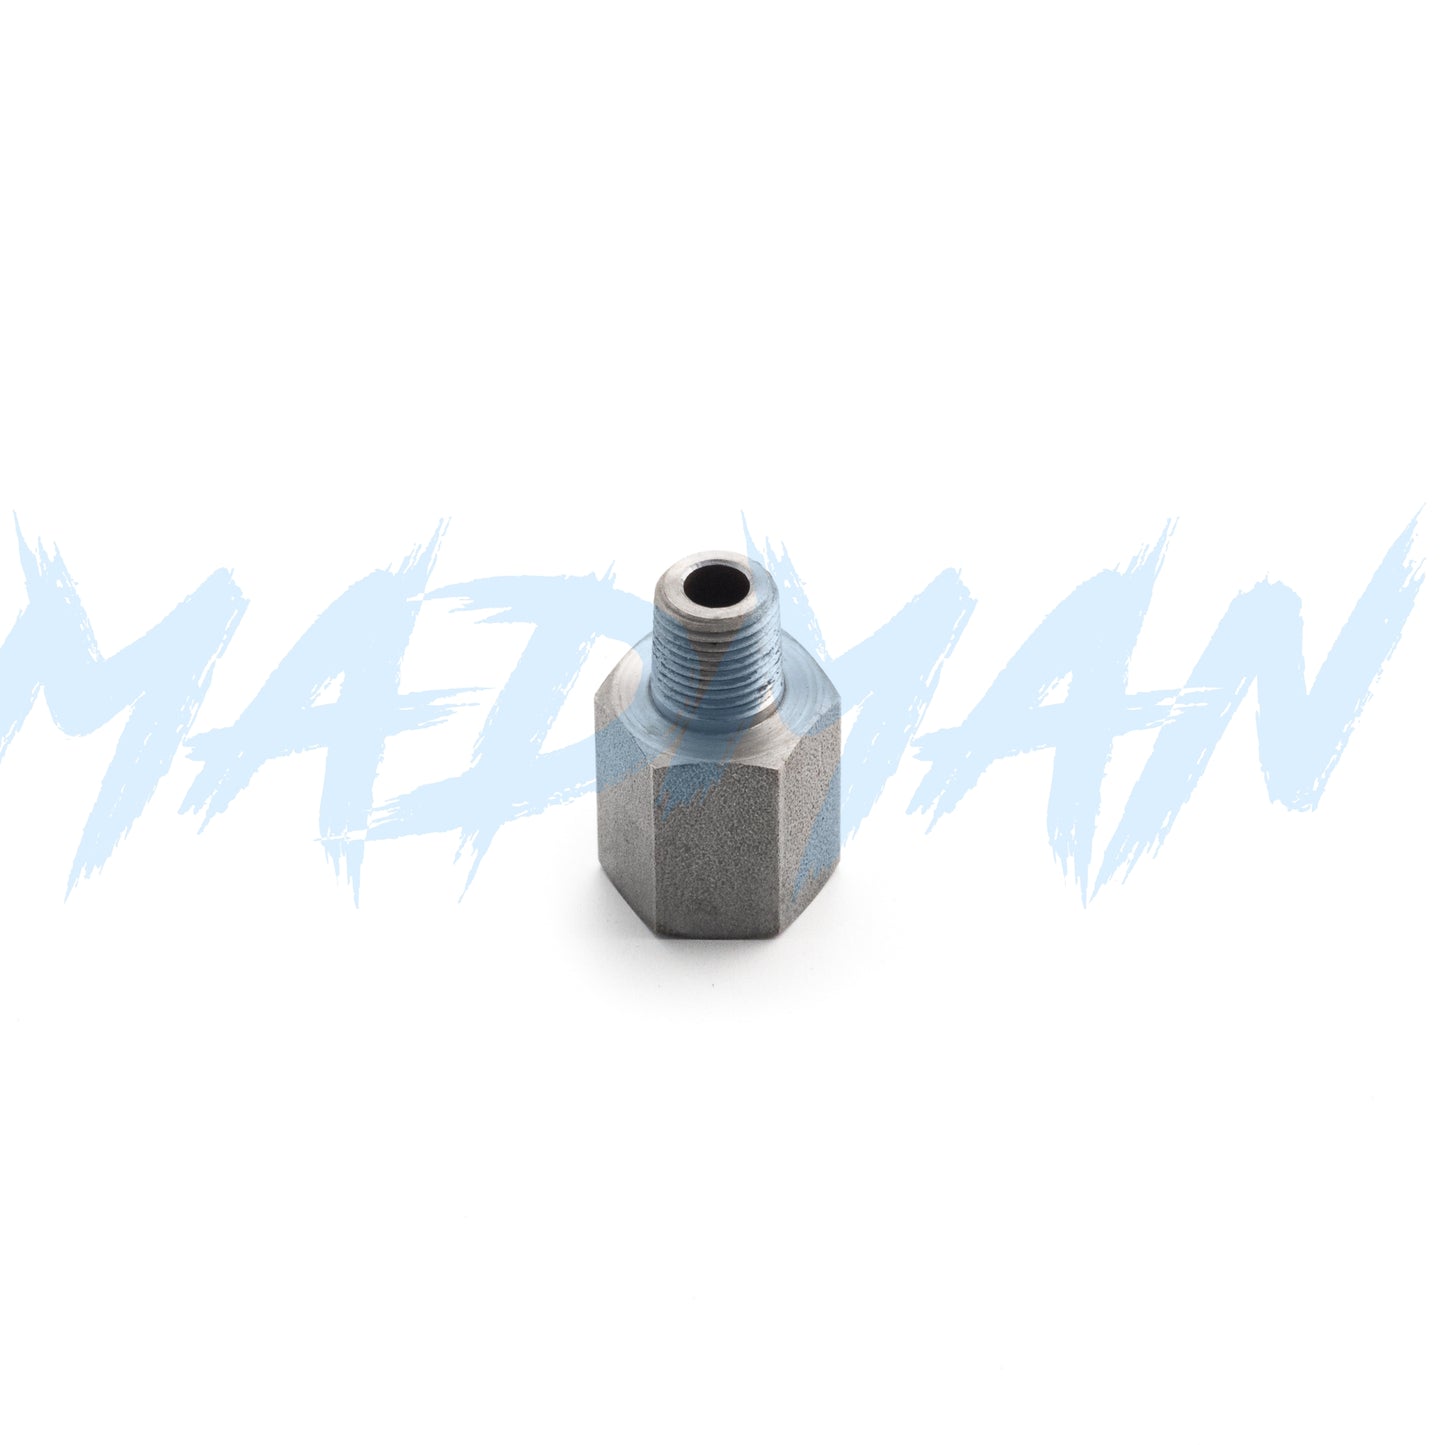 1/8 NPT to M12x1.5 Adapter